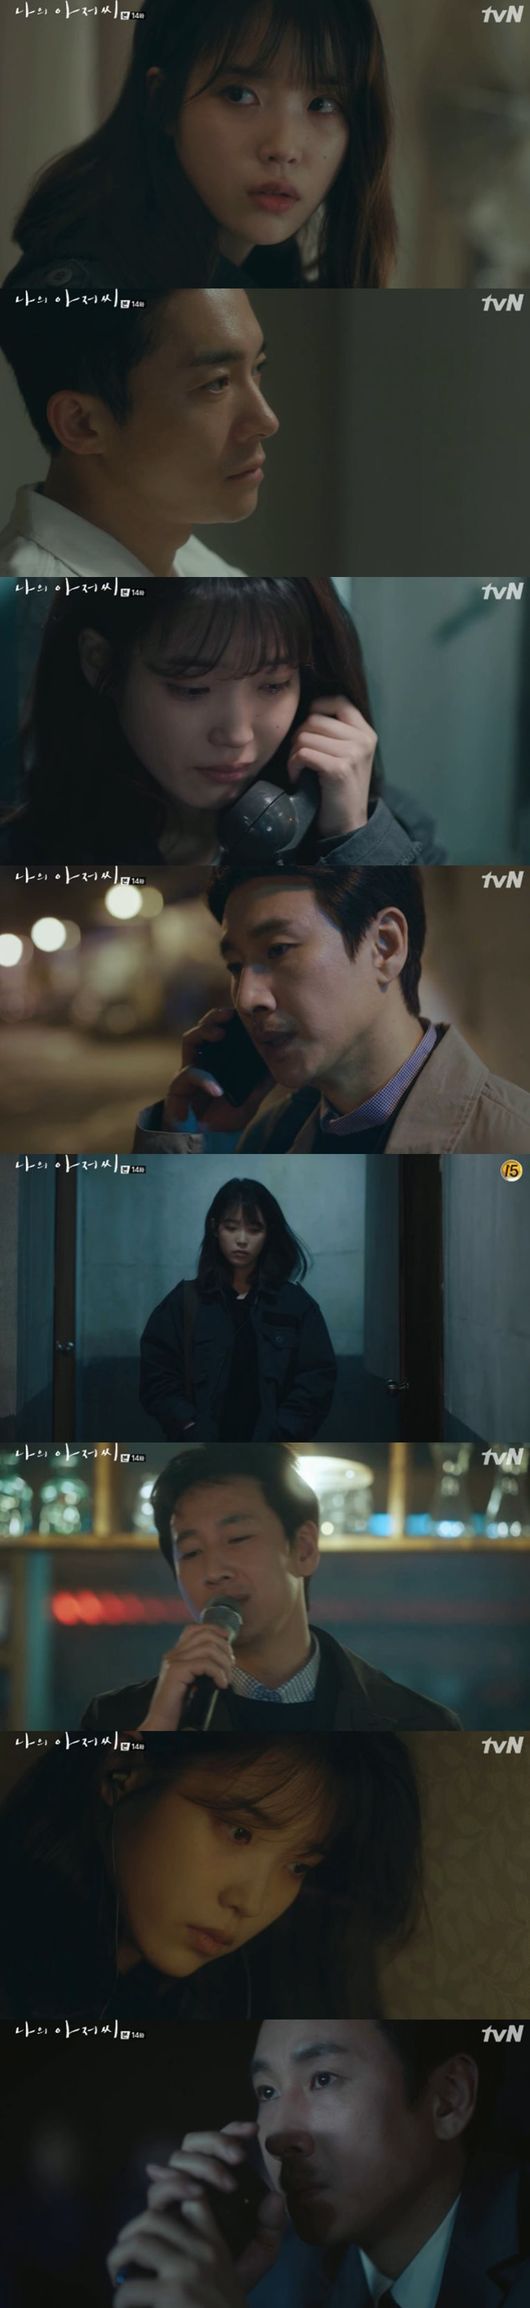 Lee Ji-euns heart, which wants to protect Lee Sun Gyun, is like death.In the 14th episode of the TVN tree drama My Uncle (playplayed by Park Hae-young/director Kim Won-seok), which was broadcast on the 10th, Lee Ji-eun (played by Lee Sun Gyun) was portrayed leaving the company to protect Park Dong-hoonOn this day, Ijian left somewhere when it was revealed that he was Murderer.Park Dong-hoon was worried about Ijian and was angry at the phone call late at night, saying, If you stop, you should tell me you will stop.But Izzian said, If you stop, youll have a farewell party for a man who killed you. Youll be scared to get rid of Haru.I am excited to see people looking at me. He added: It was the first time. Someone whos been good four times. Someone like me. Im not even born again.I am glad to meet you by chance. Yes. Call me when your grandmother dies. I cried at Park Dong-hoons answer.Lee Ji-an then continued his move for Park Dong-hoonHe visited Do Joon-young (Kim Young-min), and when Do Joon-young tried to get started, he suggested not to tell him about his affair with Kang Yoon-hee (Lee Ji-ah) if he was caught.However, Do Jun-young said, I can not see it because I do not have a scratch on Park Dong-hoonYou just have to run away hard. Ijian revealed that he was Murderer and said, Can not you kill a bitch twice?I will kill all the pups that touch Park Dong-hoon Eventually Park Dong-hoon became managing director, and Ijian spent time alone tapping it.However, Park Dong-hoon learned that Lee Ji-an had been bugging him through Park Sang-moo (Jung Hae-gyun), and at the end of the broadcast, Ijian.Call me, he said, raising his curiosity about the next episode.Lee Ji-eun, on this day, expressed his desperate heart, sometimes sadly, to keep the happiness of Park Dong-hoon in the play.Especially, Park Dong-hoon, who became a business manager, was saddened by the lonely act of Lee Ji-an who was listening to it when he was singing with the celebration of his family.Park Dong-hoon, who learned about Lee Ji-ans eavesdropping, is interested in what kind of action he will take.Also, Lee Ji-ans assistant, Song Ki-bum (Ahn Sung Kyun), was caught by the police, and Lee Kwang-il (Jang Ki-yong), who regarded him as his enemy, learned this fact, so attention is focused on whether Lee Ji-an can overcome all of these trials in the future.Capture the broadcast screen of My Uncle.